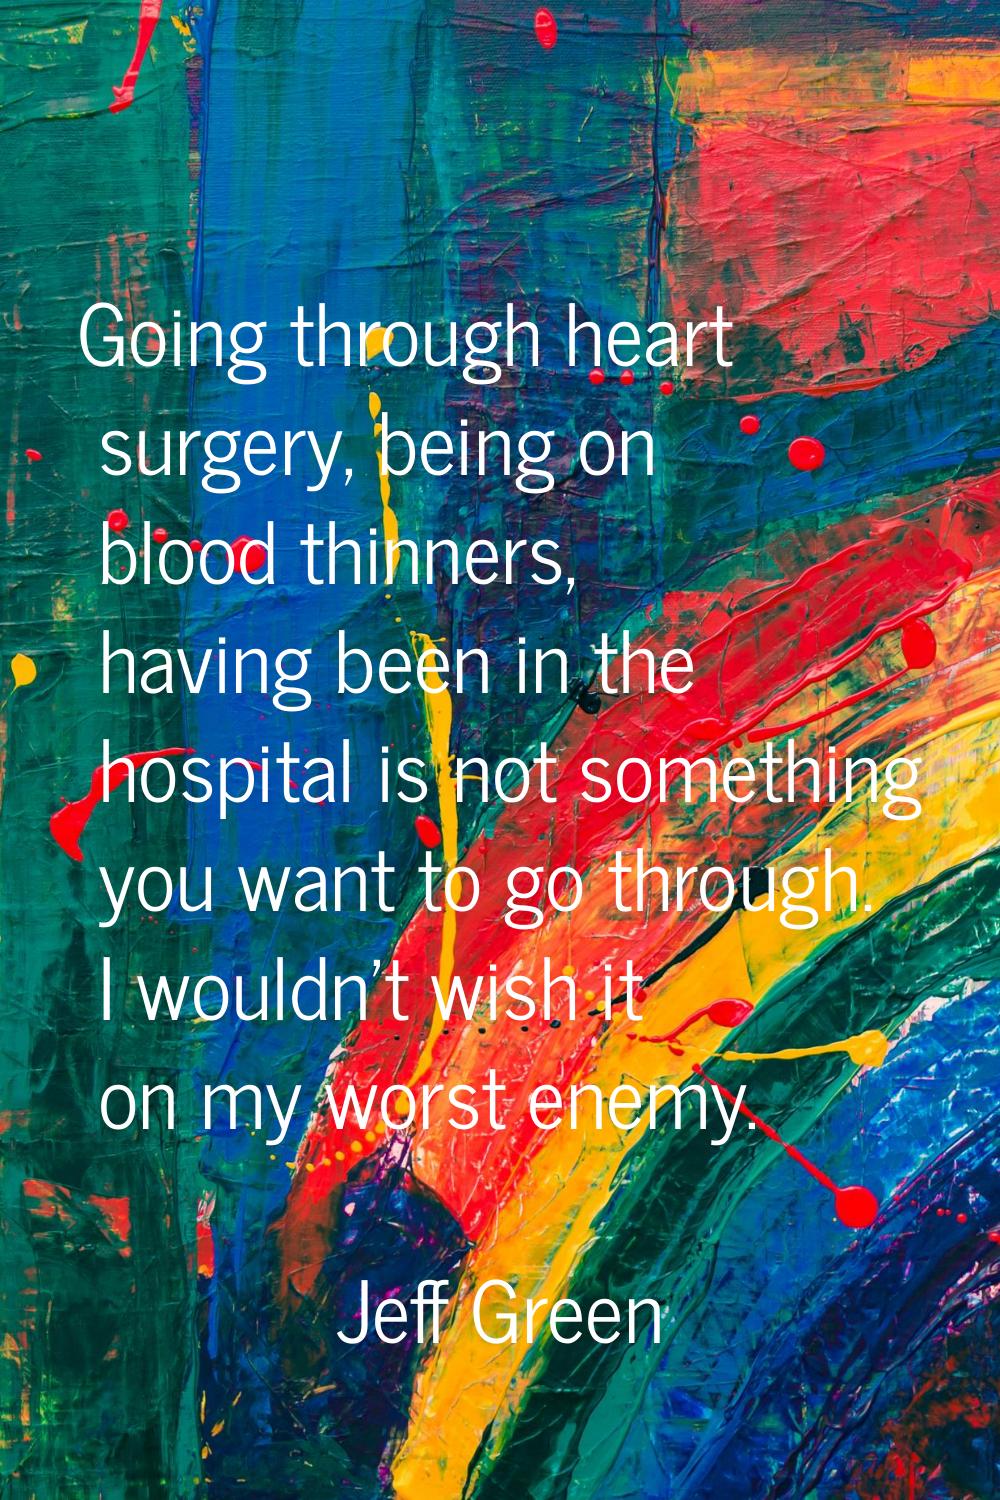 Going through heart surgery, being on blood thinners, having been in the hospital is not something 